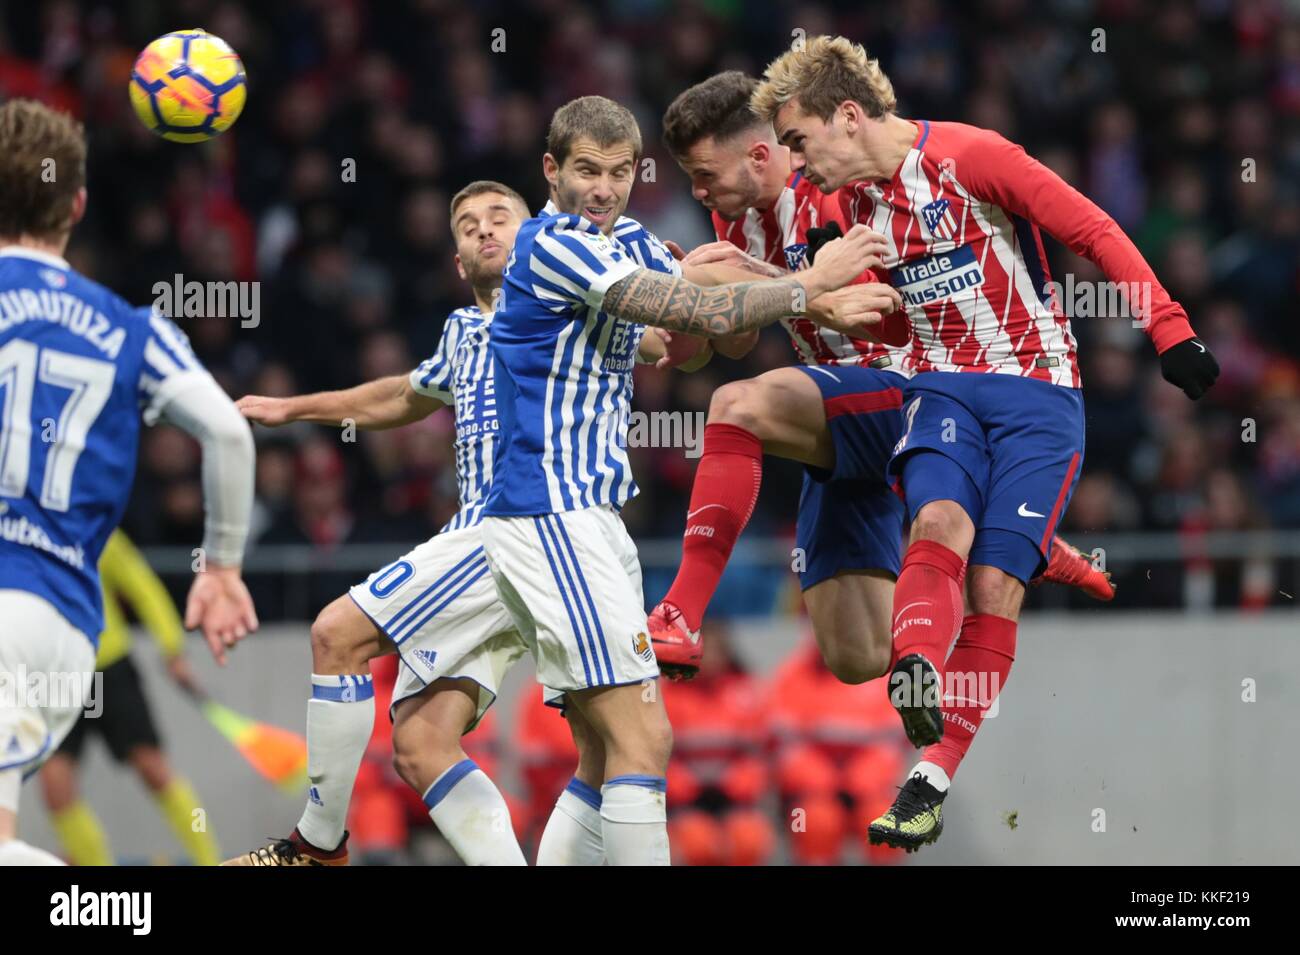 Madrid, Spain. 2nd Dec, 2017. Atletico de Madrid's Griezmann (1st R) competes for a header during a Spanish League match between Atletico de Madrid and Real Sociedad in, Madrid, Spain, Dec 2, 2017. Atletico de Madrid won 2-1. Credit: Juan Carlos Rojas/Xinhua/Alamy Live News Stock Photo